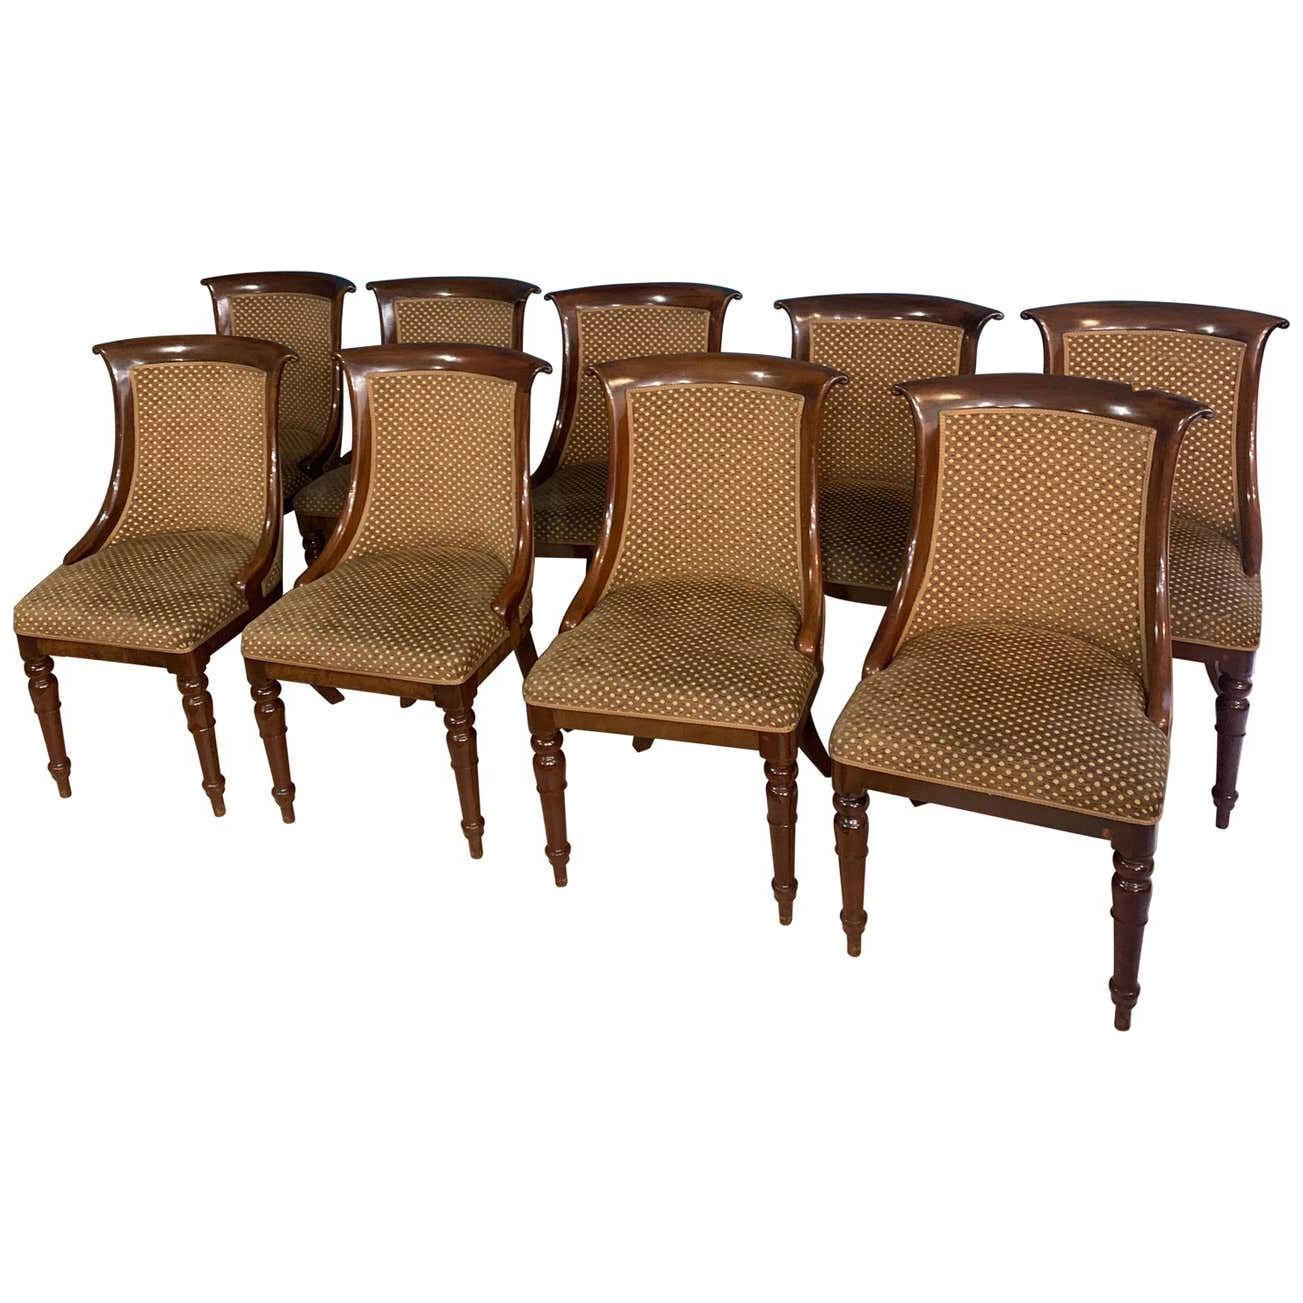 Set of Nine Dining Chairs and One Armchair in Mahogany, Circa 1880